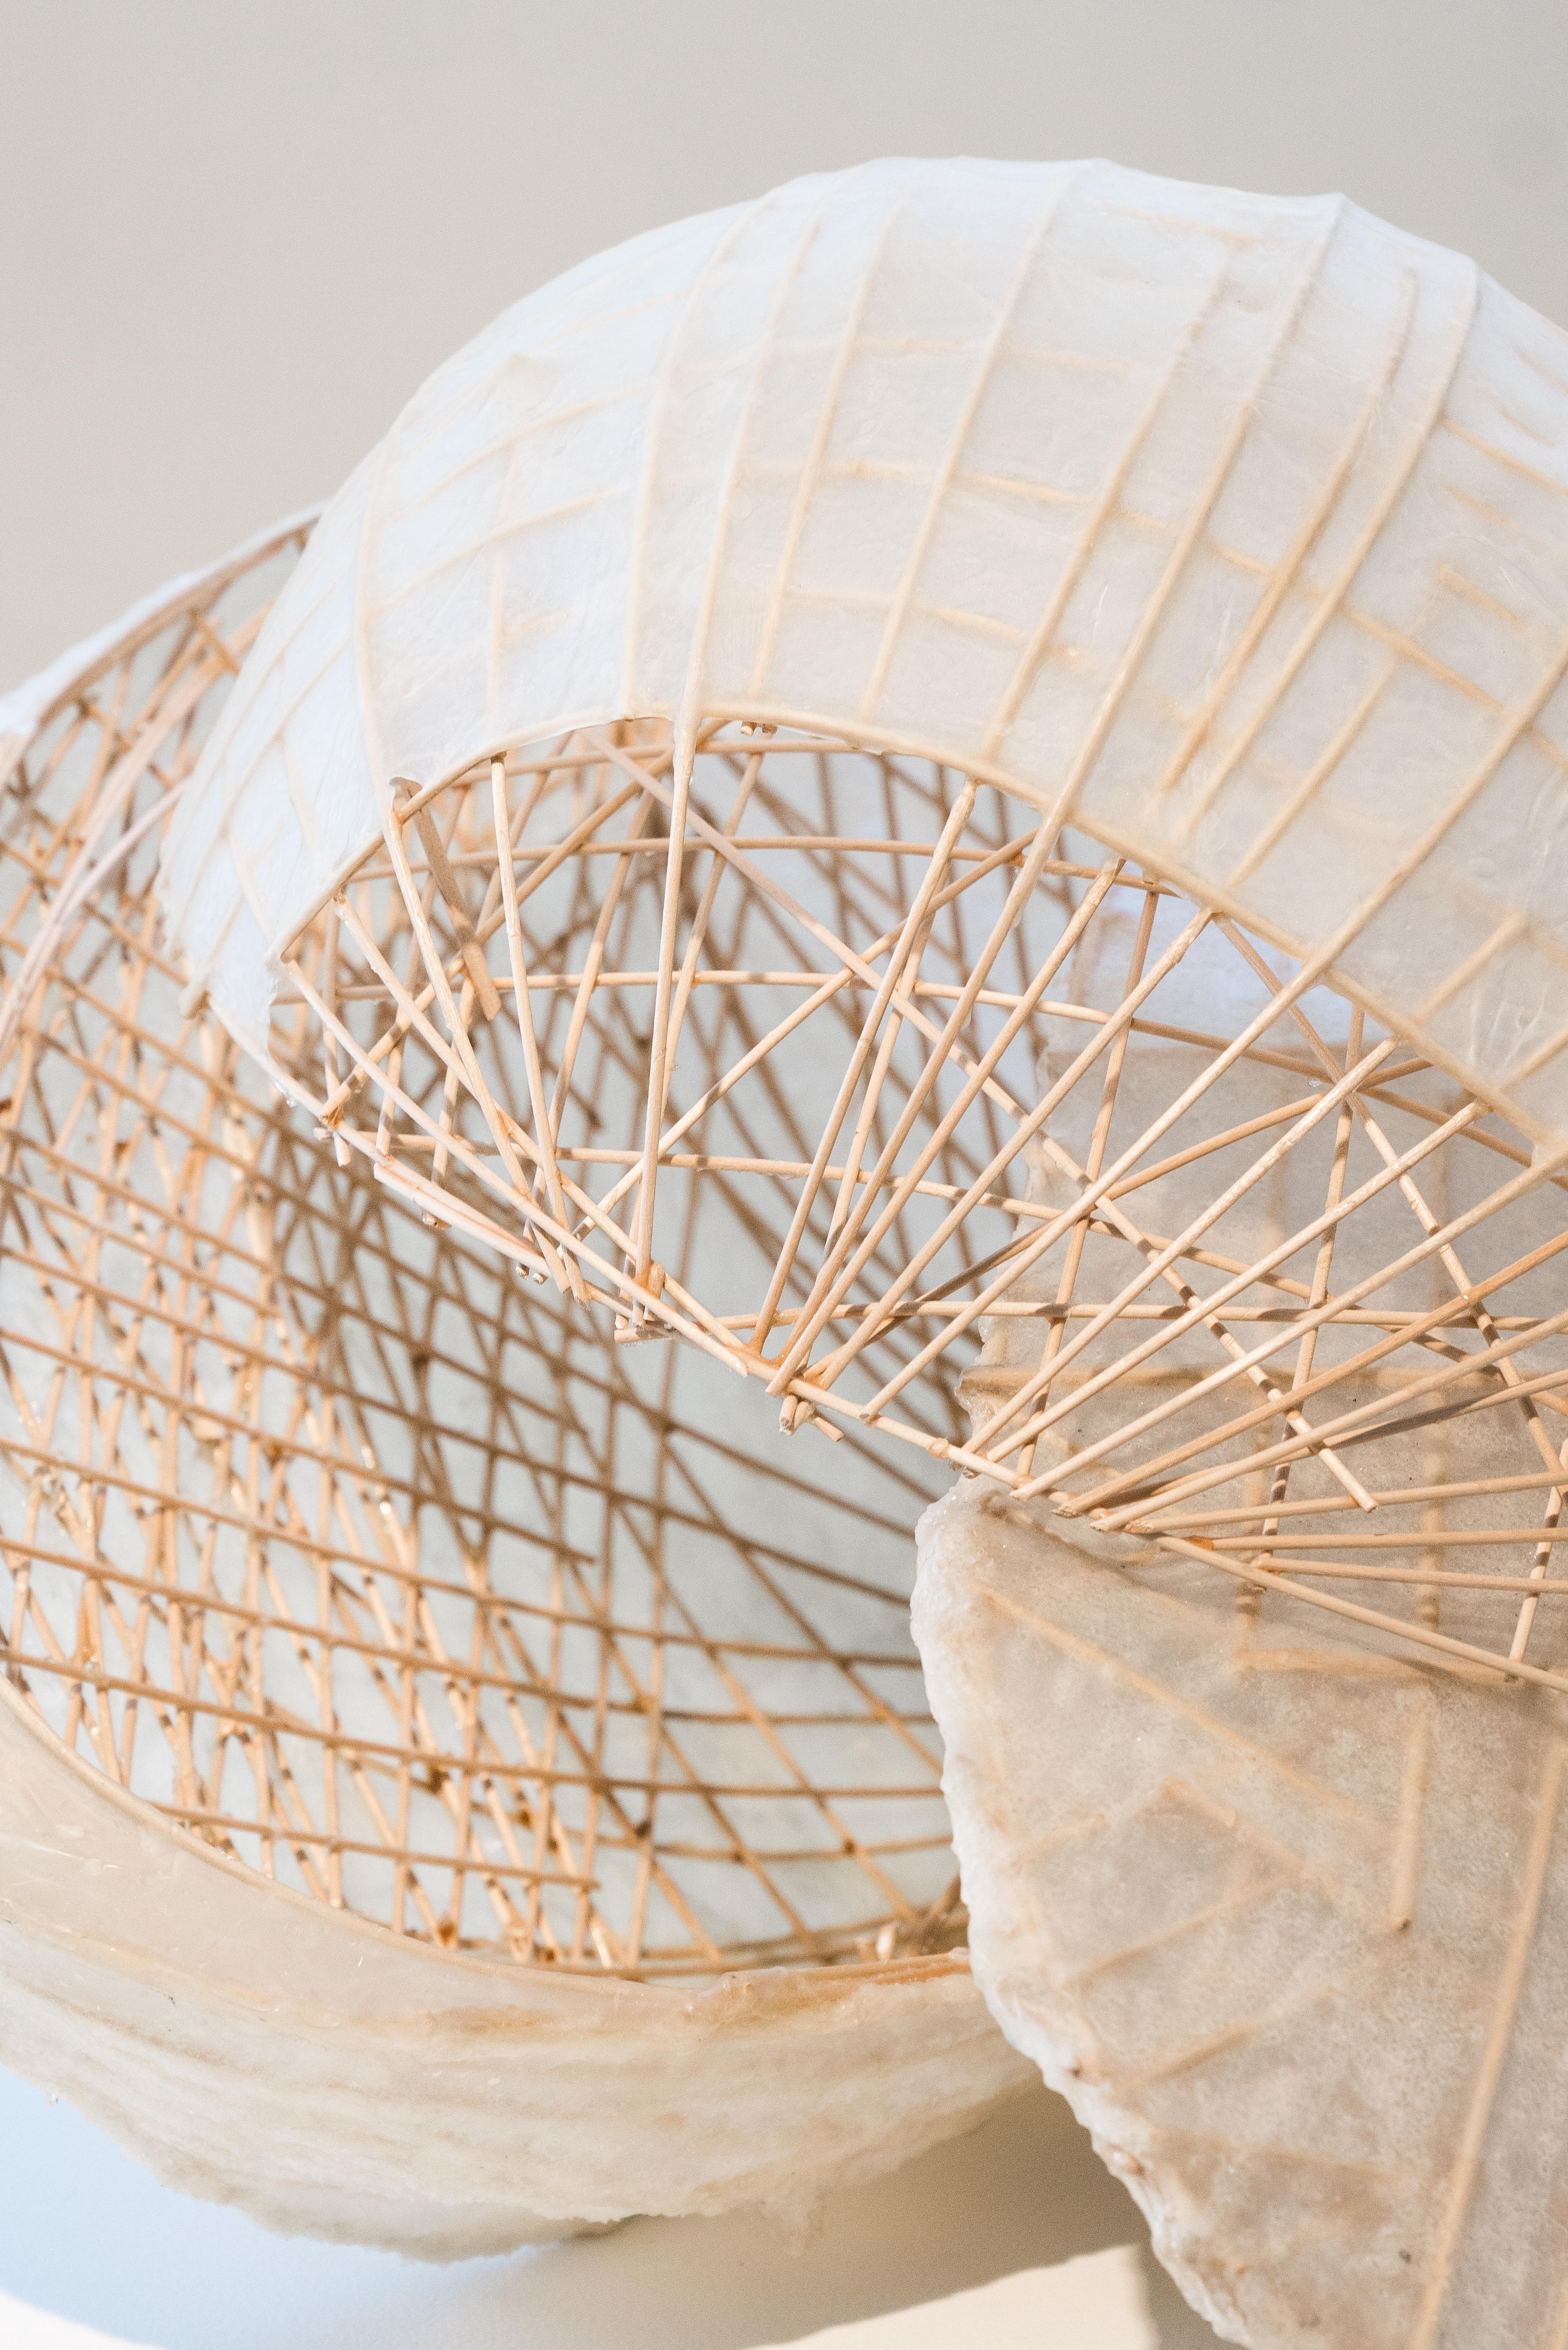 Originally used as a model for a visionary Concert Hall, the sculpture relies on the tension of curved birch dowels and skinned with artificial membrane. Void of blueprint or numbers, Talasnik builds relying on organic growth with one section built